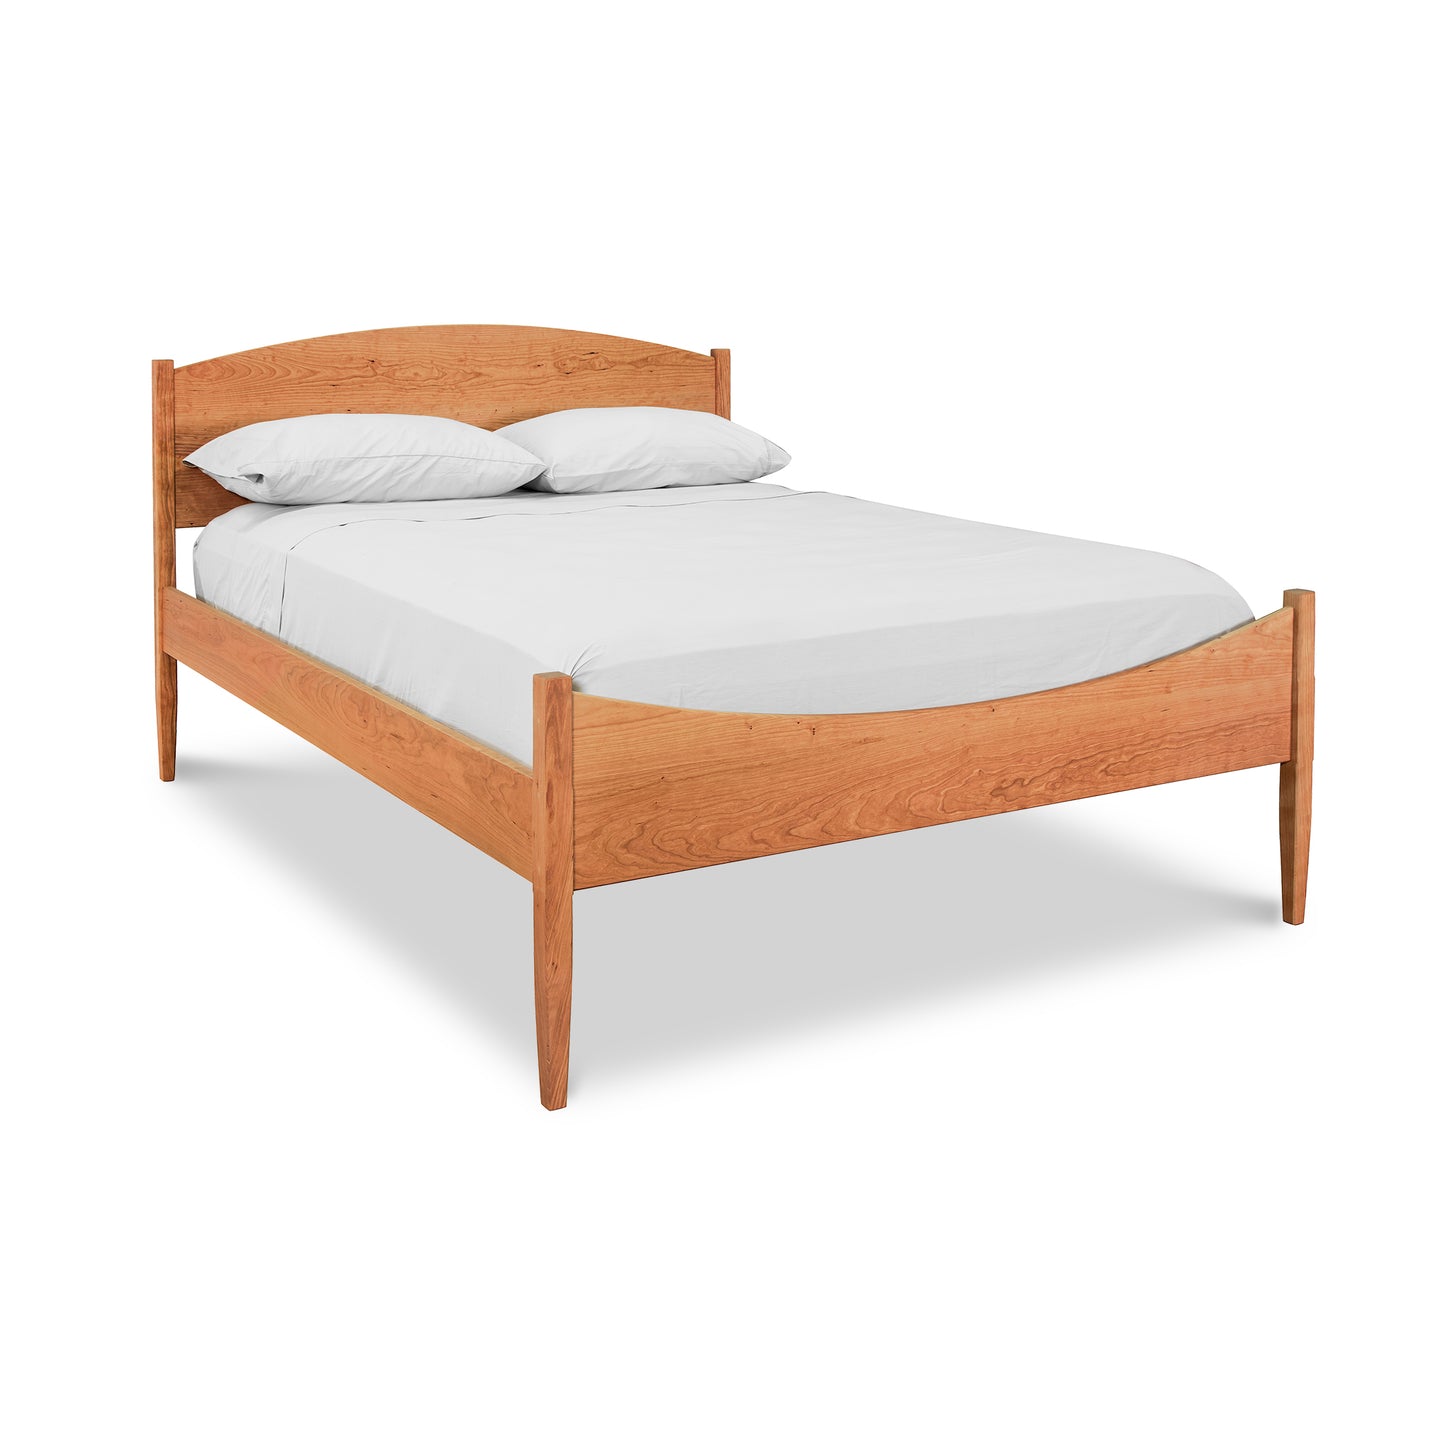 A simple Vermont Shaker Moon Bed from Maple Corner Woodworks, with a white mattress and two pillows against a white background.